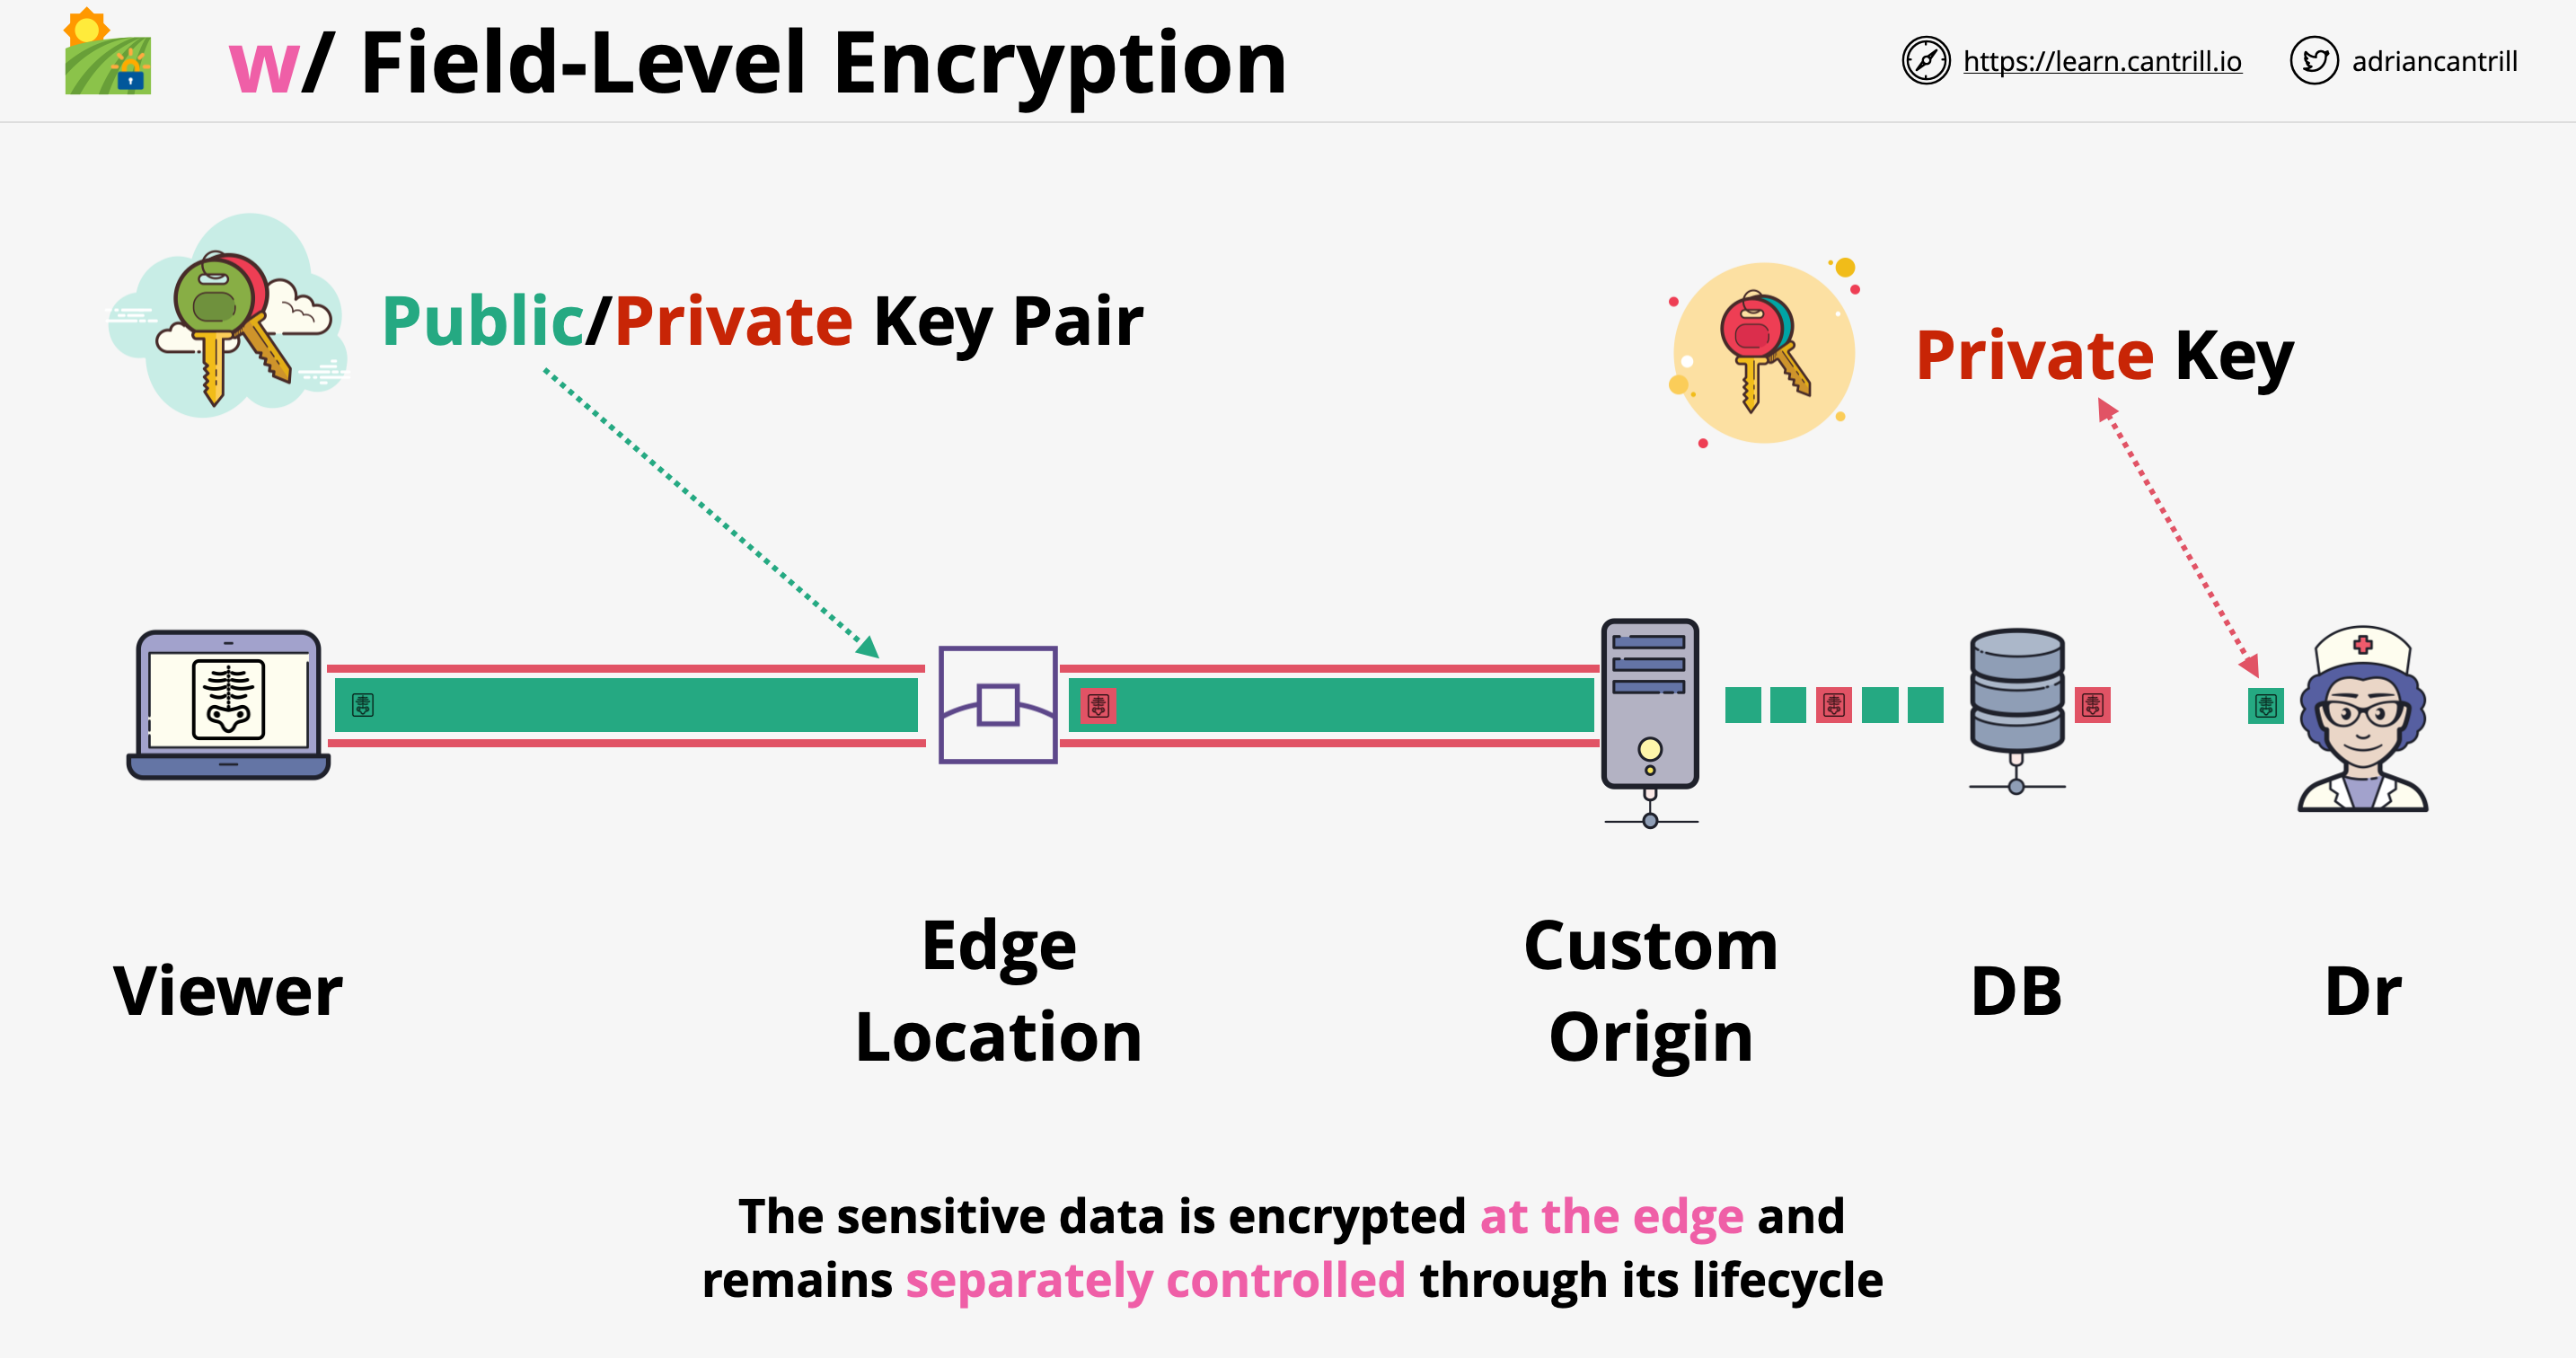 Field-Level encryption architecture